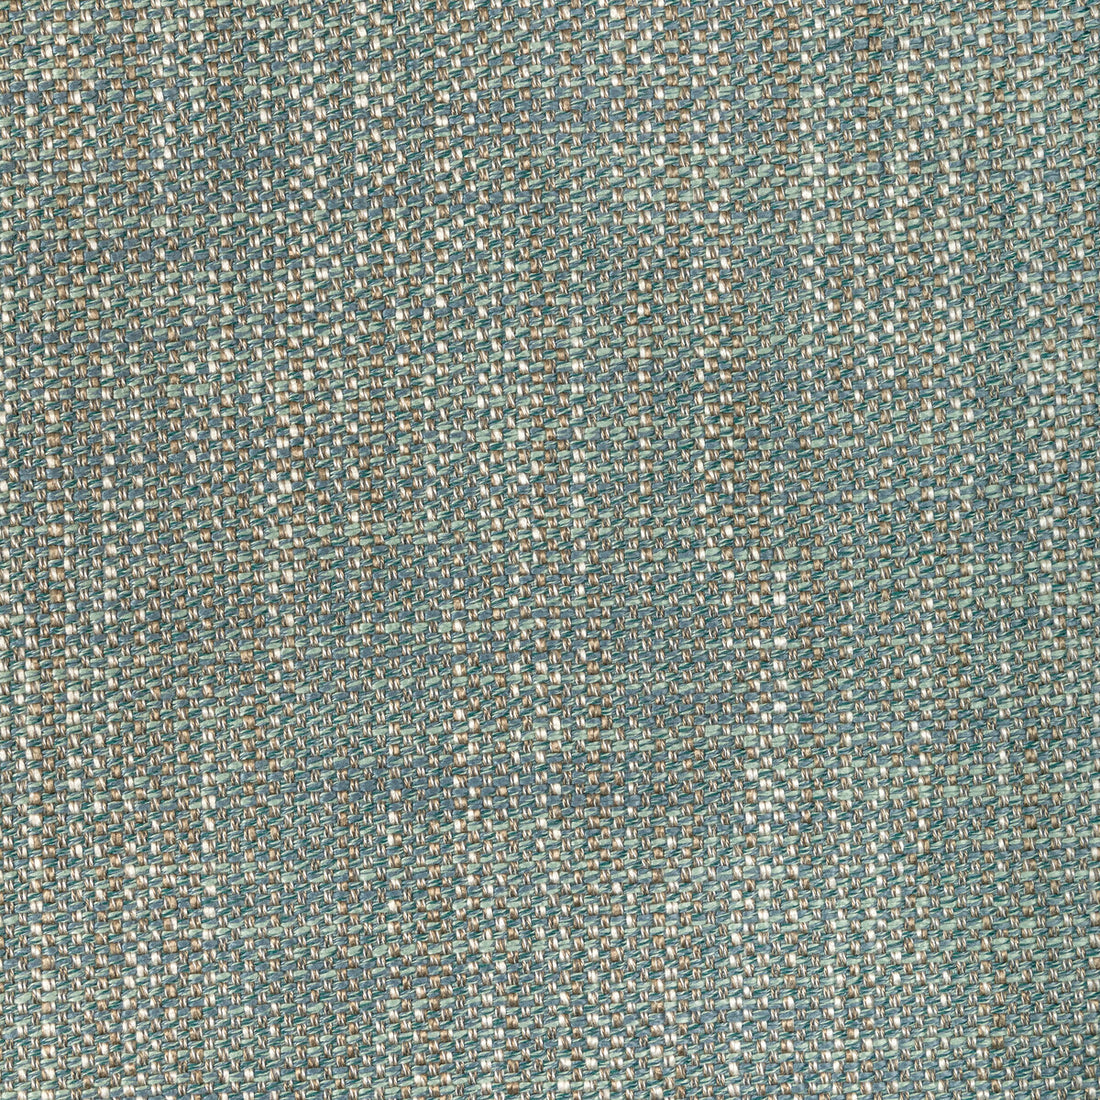 Kravet Design fabric in 36414-1615 color - pattern 36414.1615.0 - by Kravet Design in the Performance Crypton Home collection